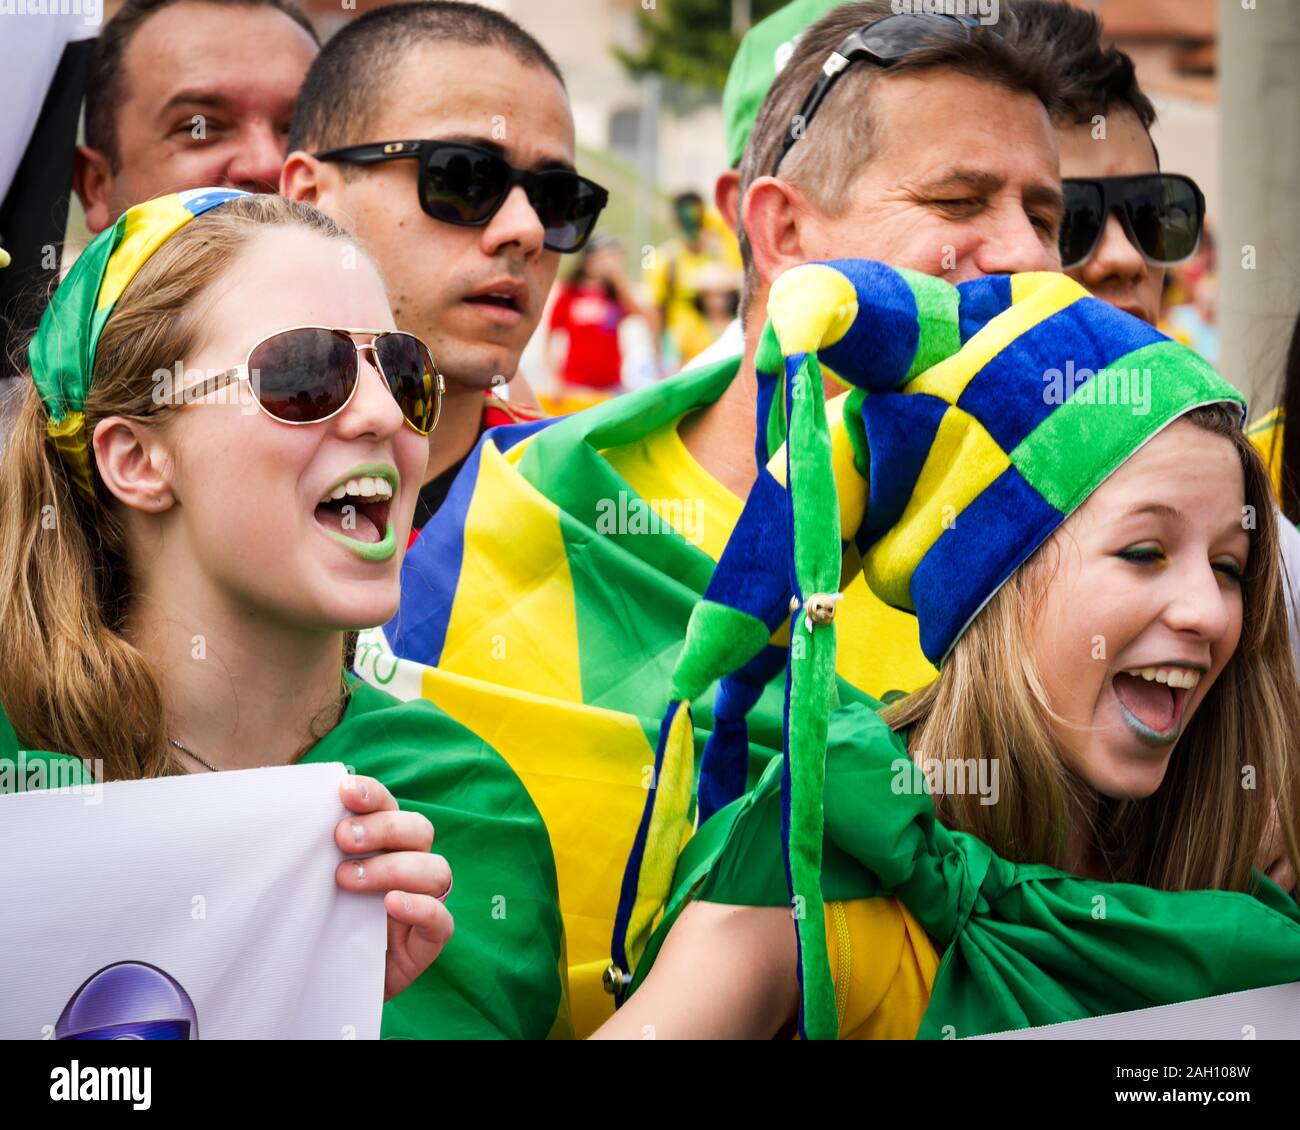 FORTALEZA, BRAZIL - 4 JULY 2014: A candid view of a pair of young female Brazilian soccer fans in their team colours and an excited mood before a matc Stock Photo